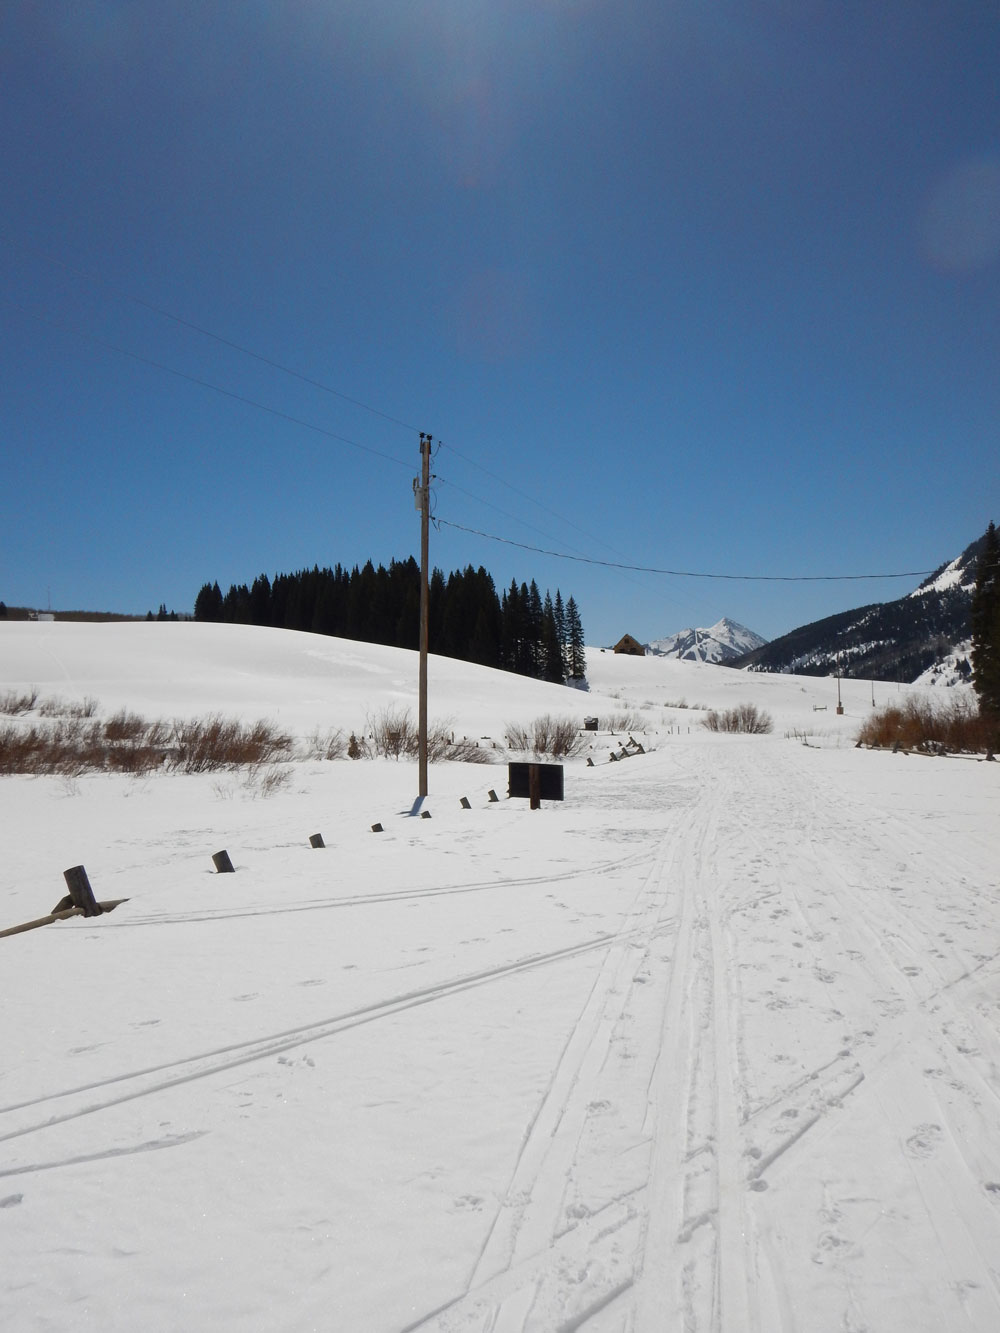 Sun shines above the snow-covered Gothic Road at Gothic Townsite, where the second ARM Mobile Facility will collect measurements during the SAIL campaign